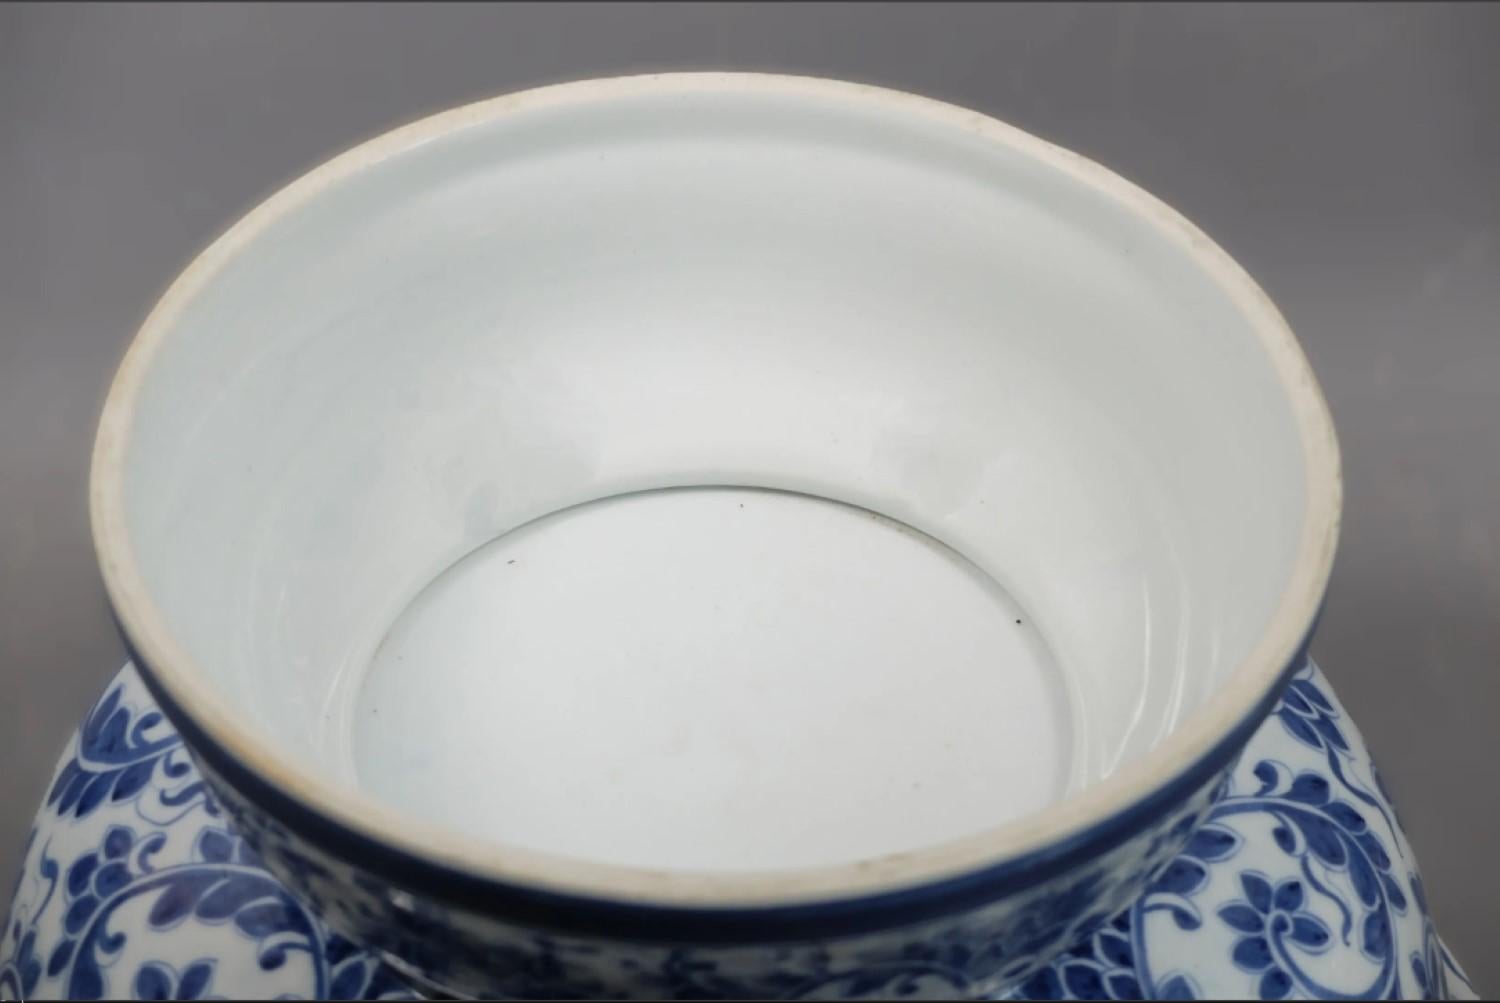 Large fruit Bowl Cup Basin on pedestal blue white porcelain - Qing Style - China For Sale 1